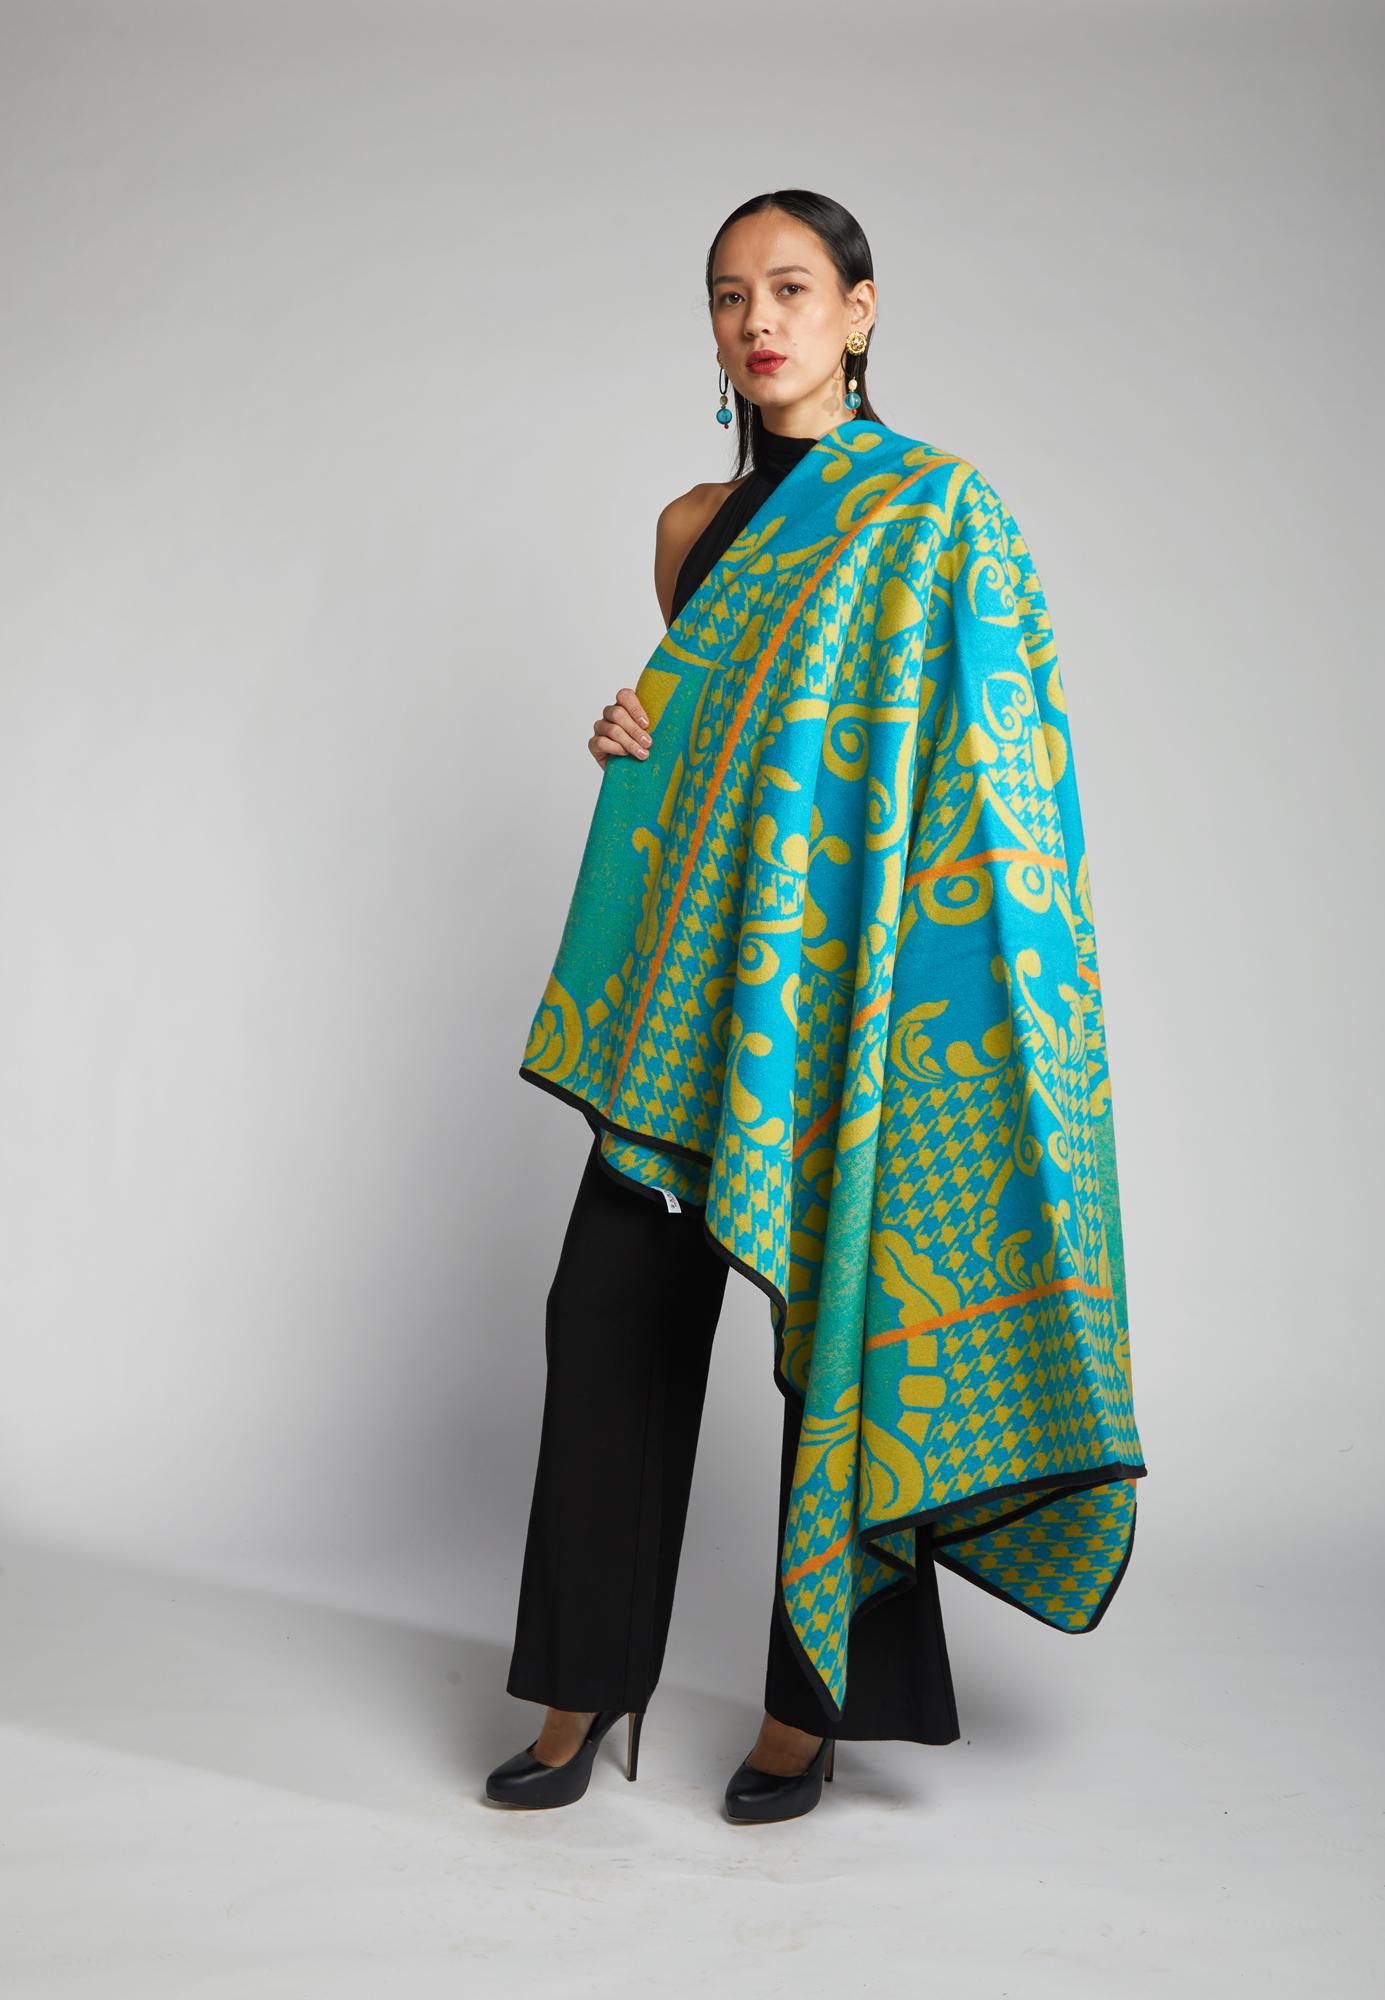 South African Basotho Heritage Blanket Scarf - Turquoise Mustard Heart For Sale